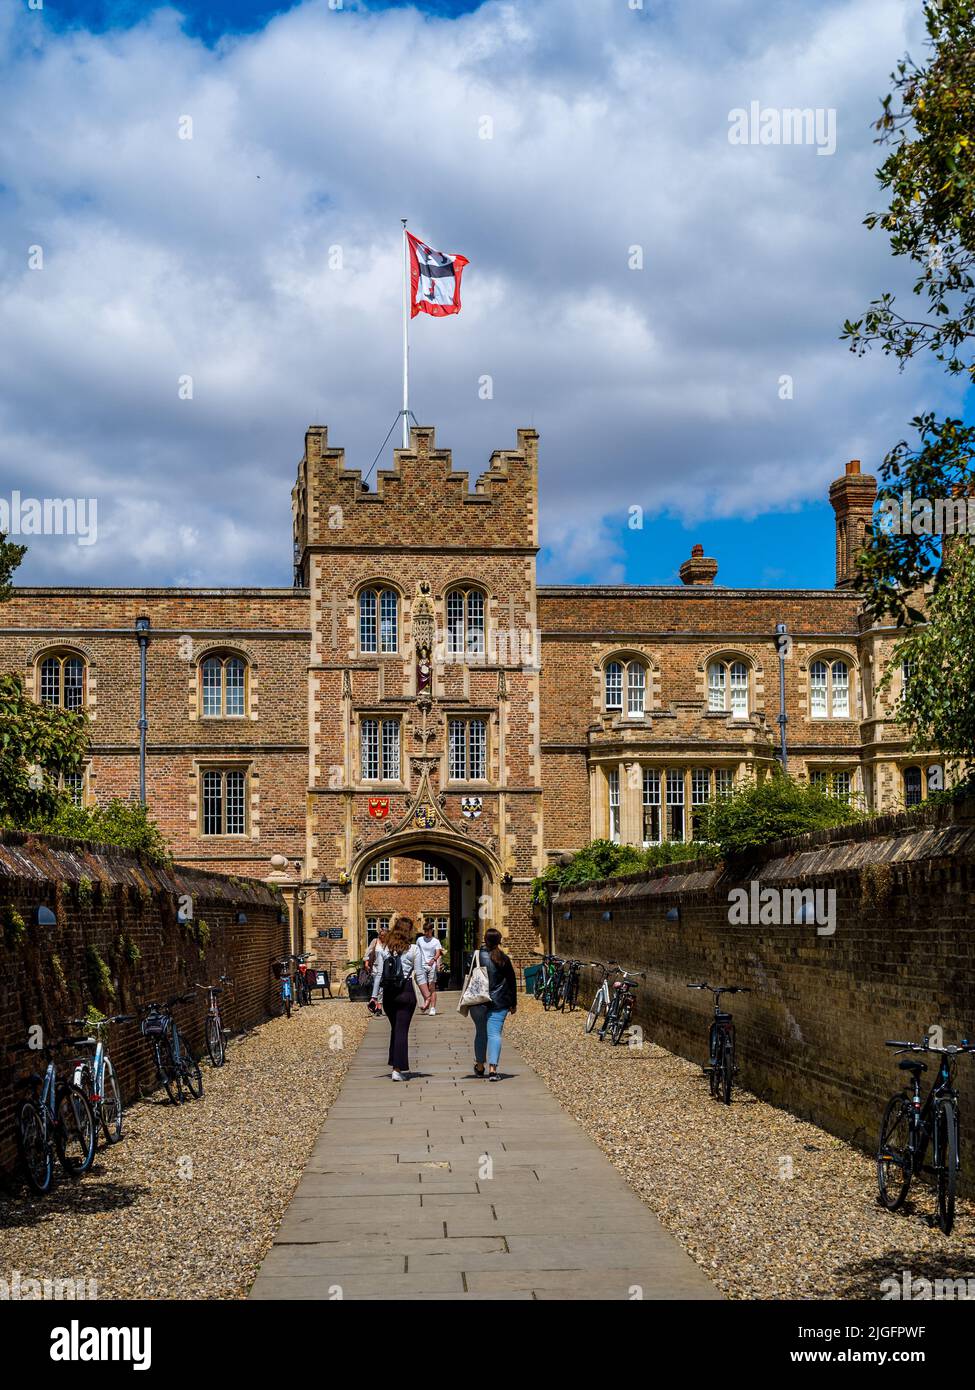 Jesus College Cambridge - Main gate entrance walkway, known as the chimney, to Jesus College, part of the University of Cambridge. Founded in 1496. Stock Photo